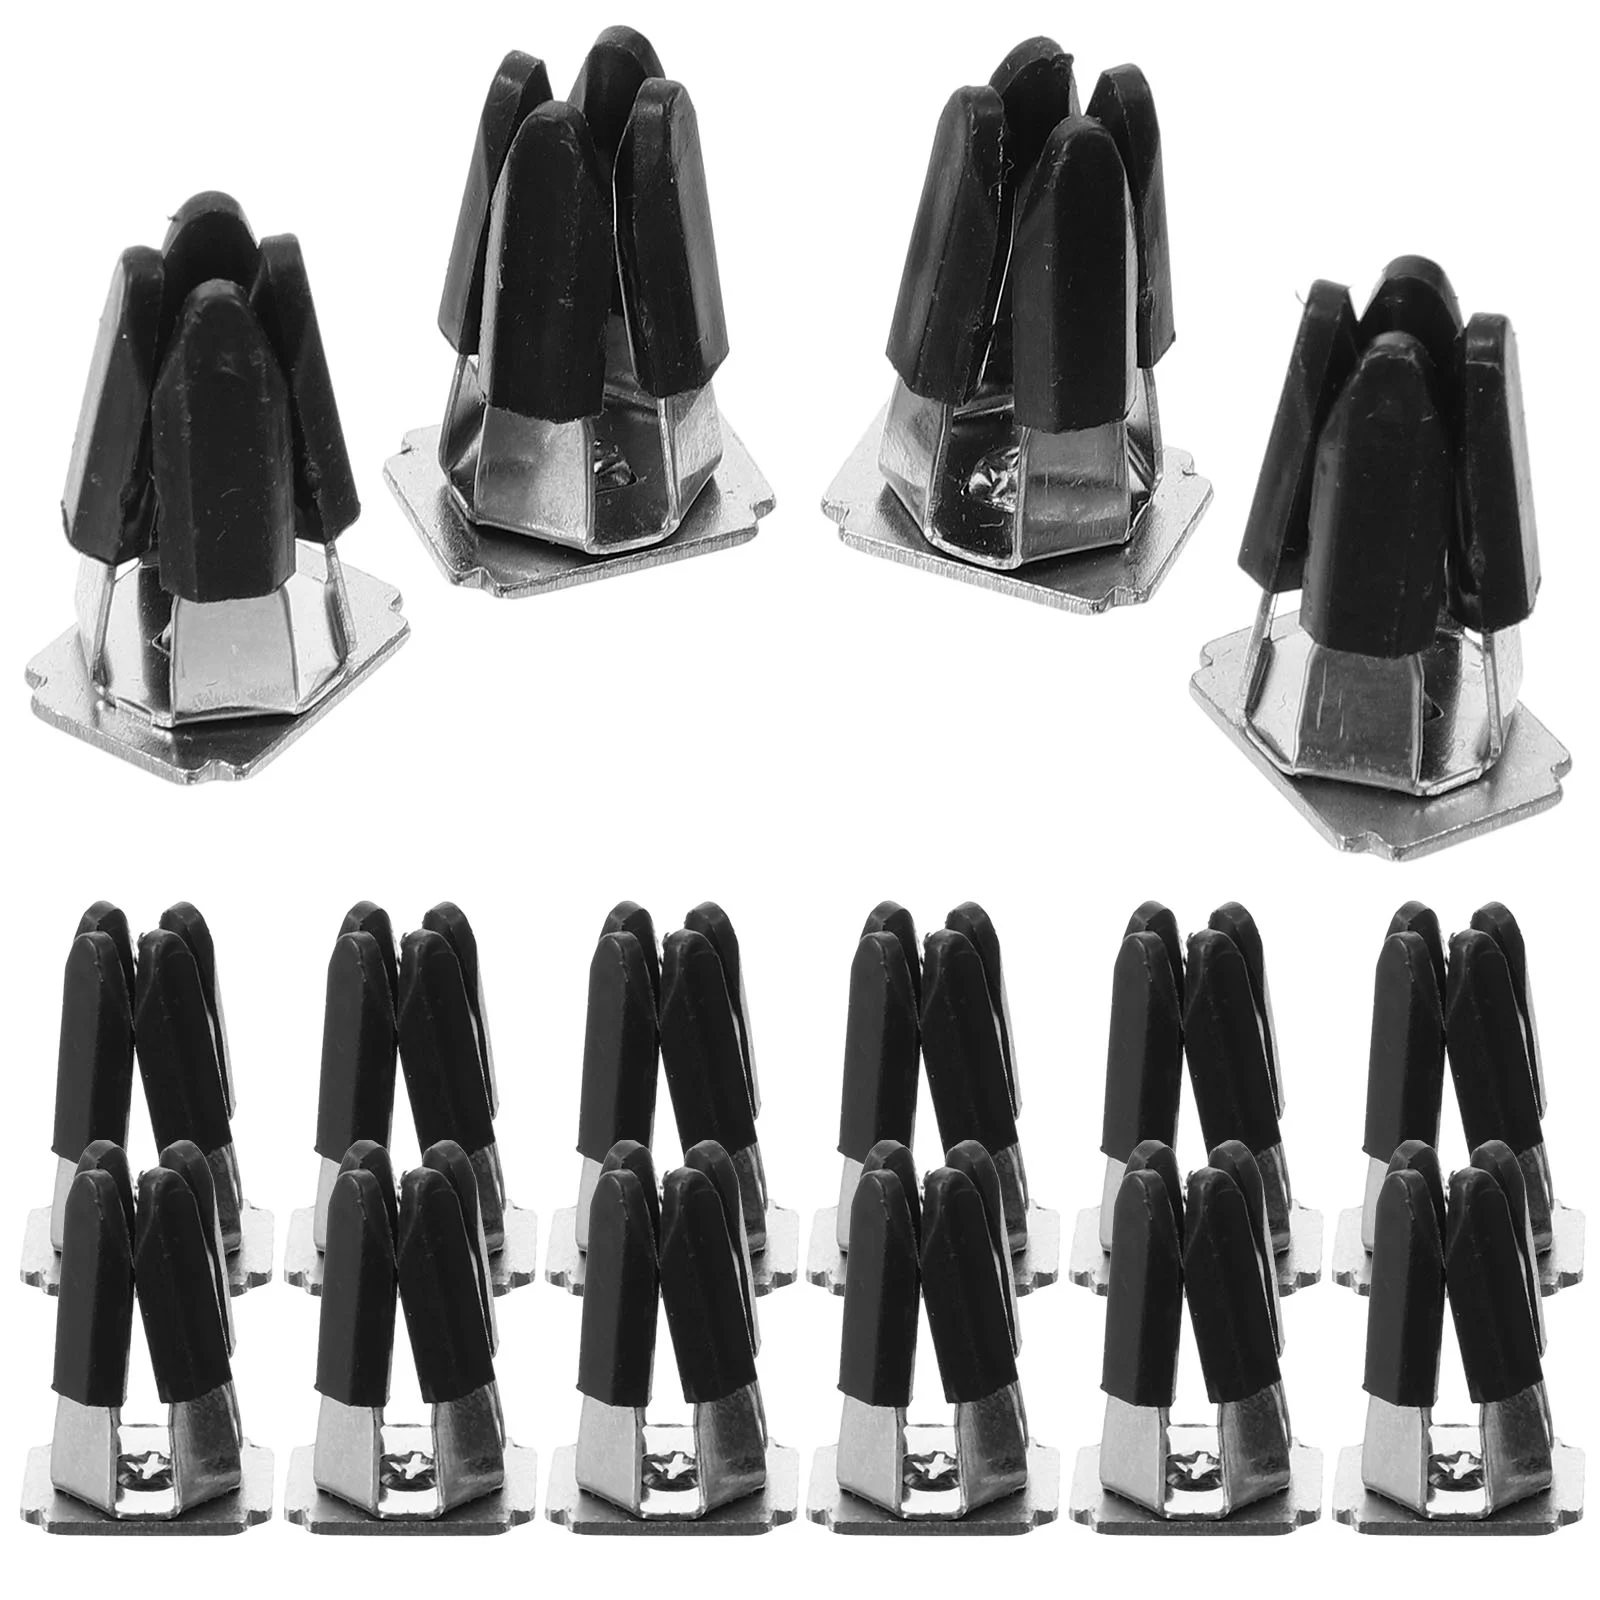 

20 Pcs Air Outlet Clip Cars Accessory Vent Clips Aromatherapy Steel Freshener Diffuser